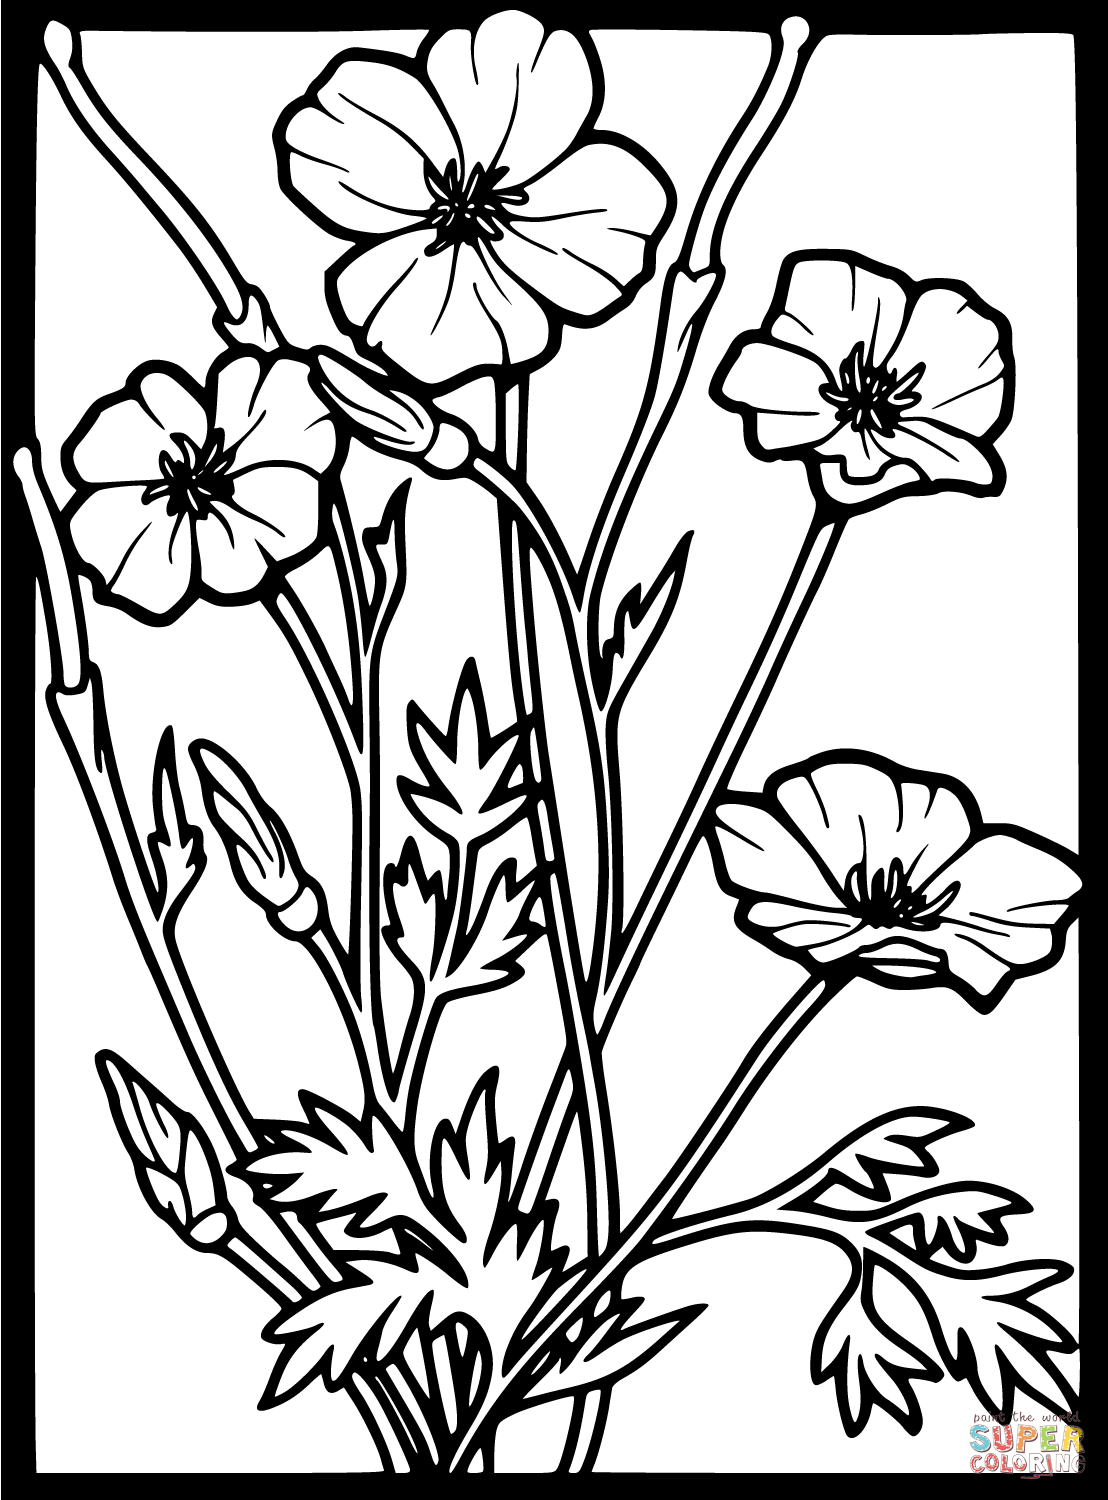 Poppy coloring #13, Download drawings